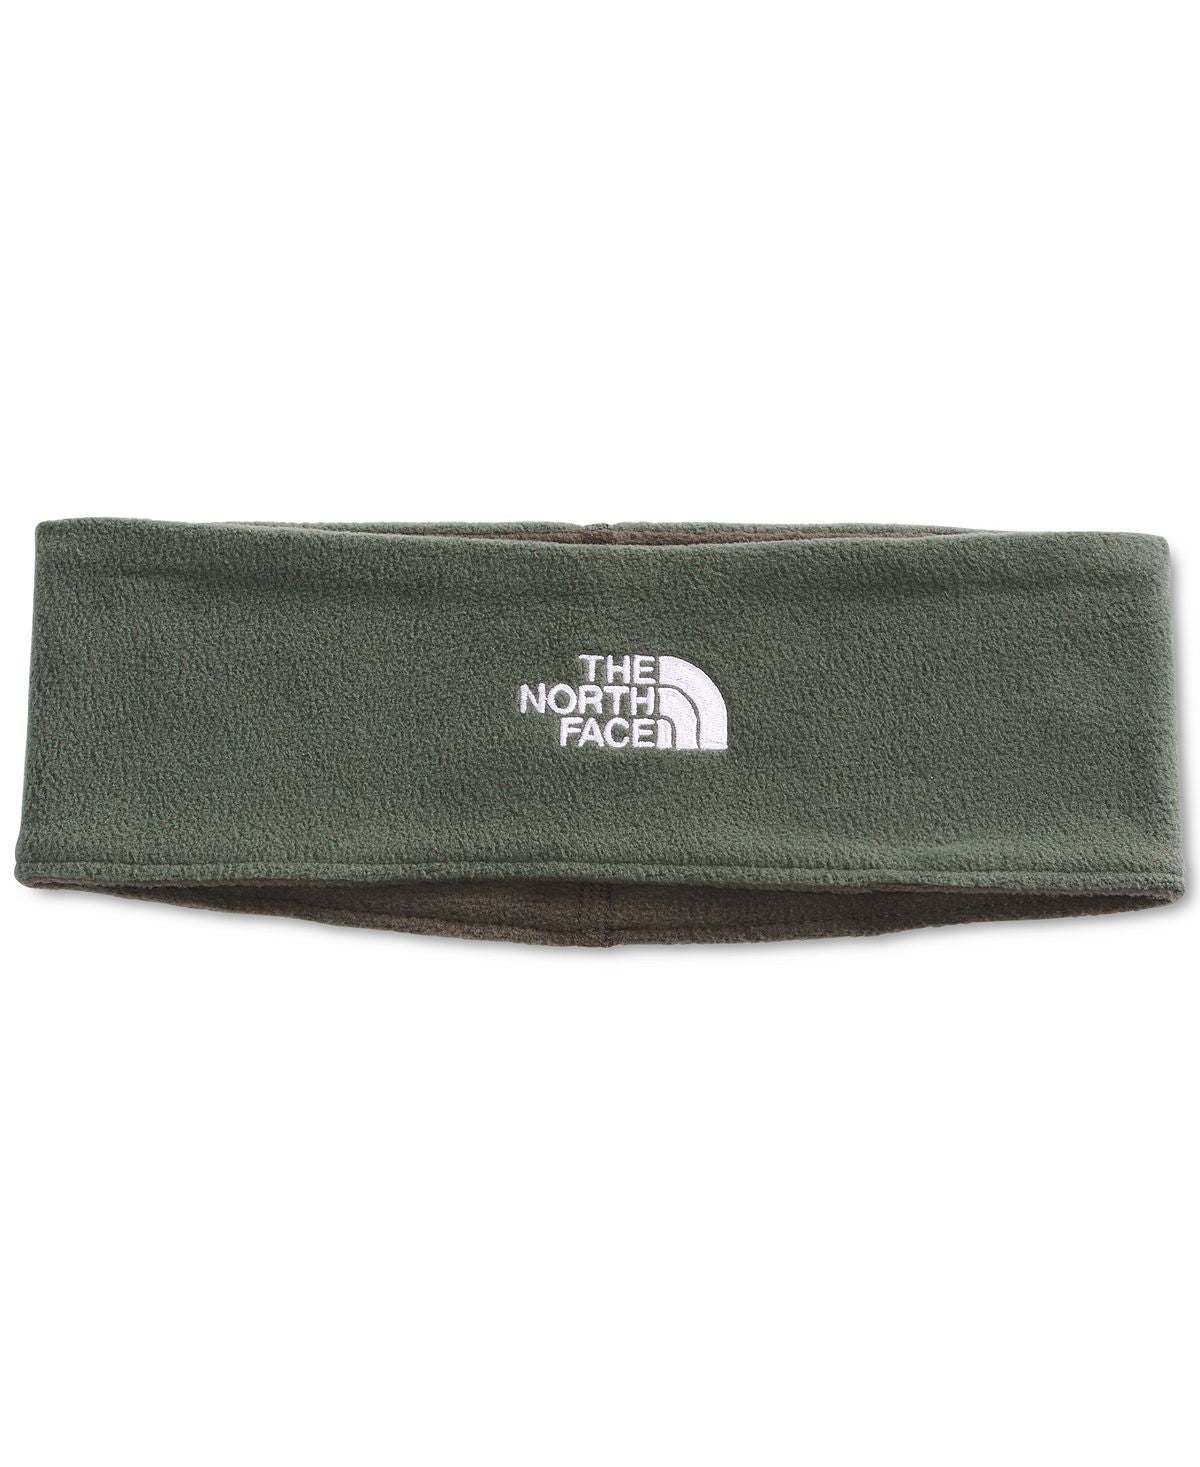 The North Face Standard Issue Reversible Logo Embroidered Fleece Earband Thyme/new Taupe Green